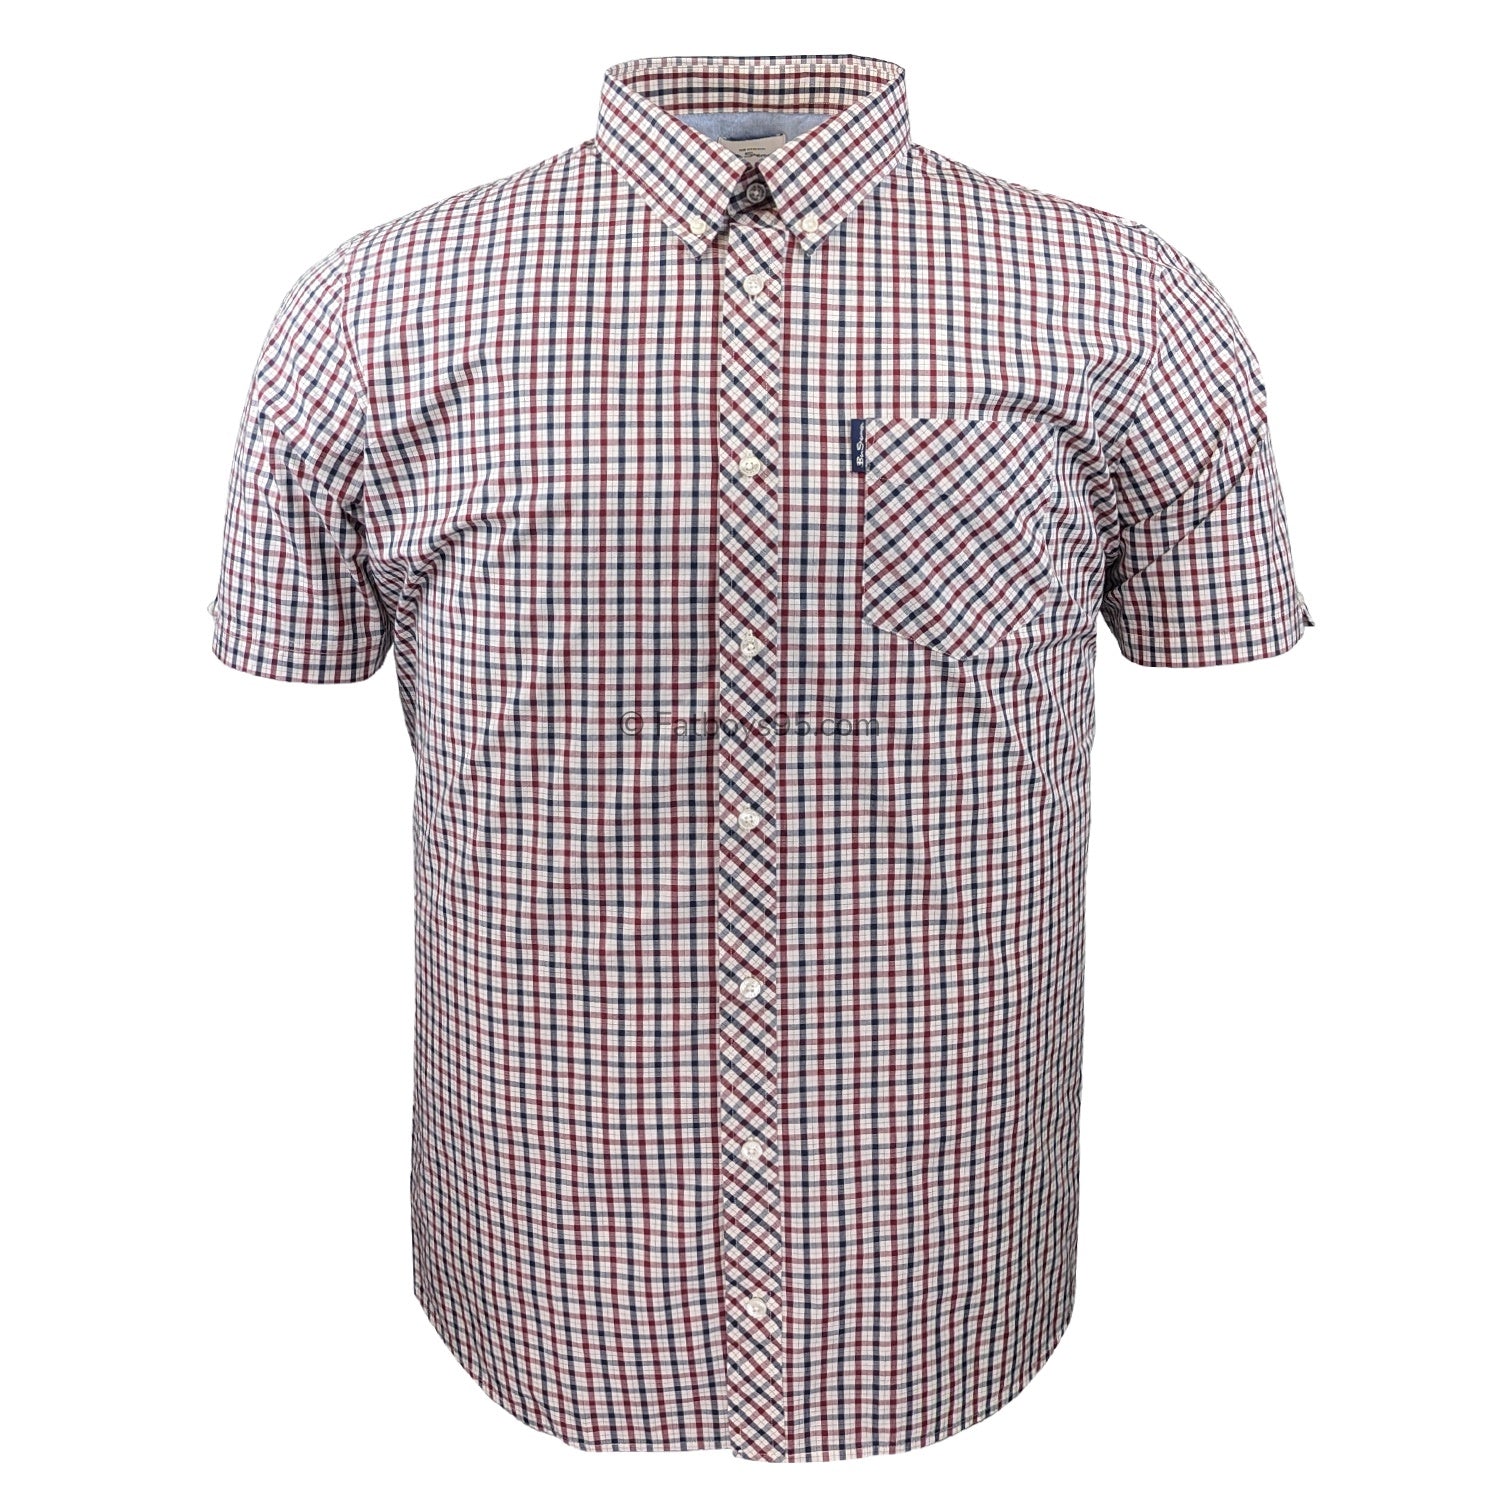 Ben Sherman Signature House Check S/S Shirt - 0059144IL - Red 1